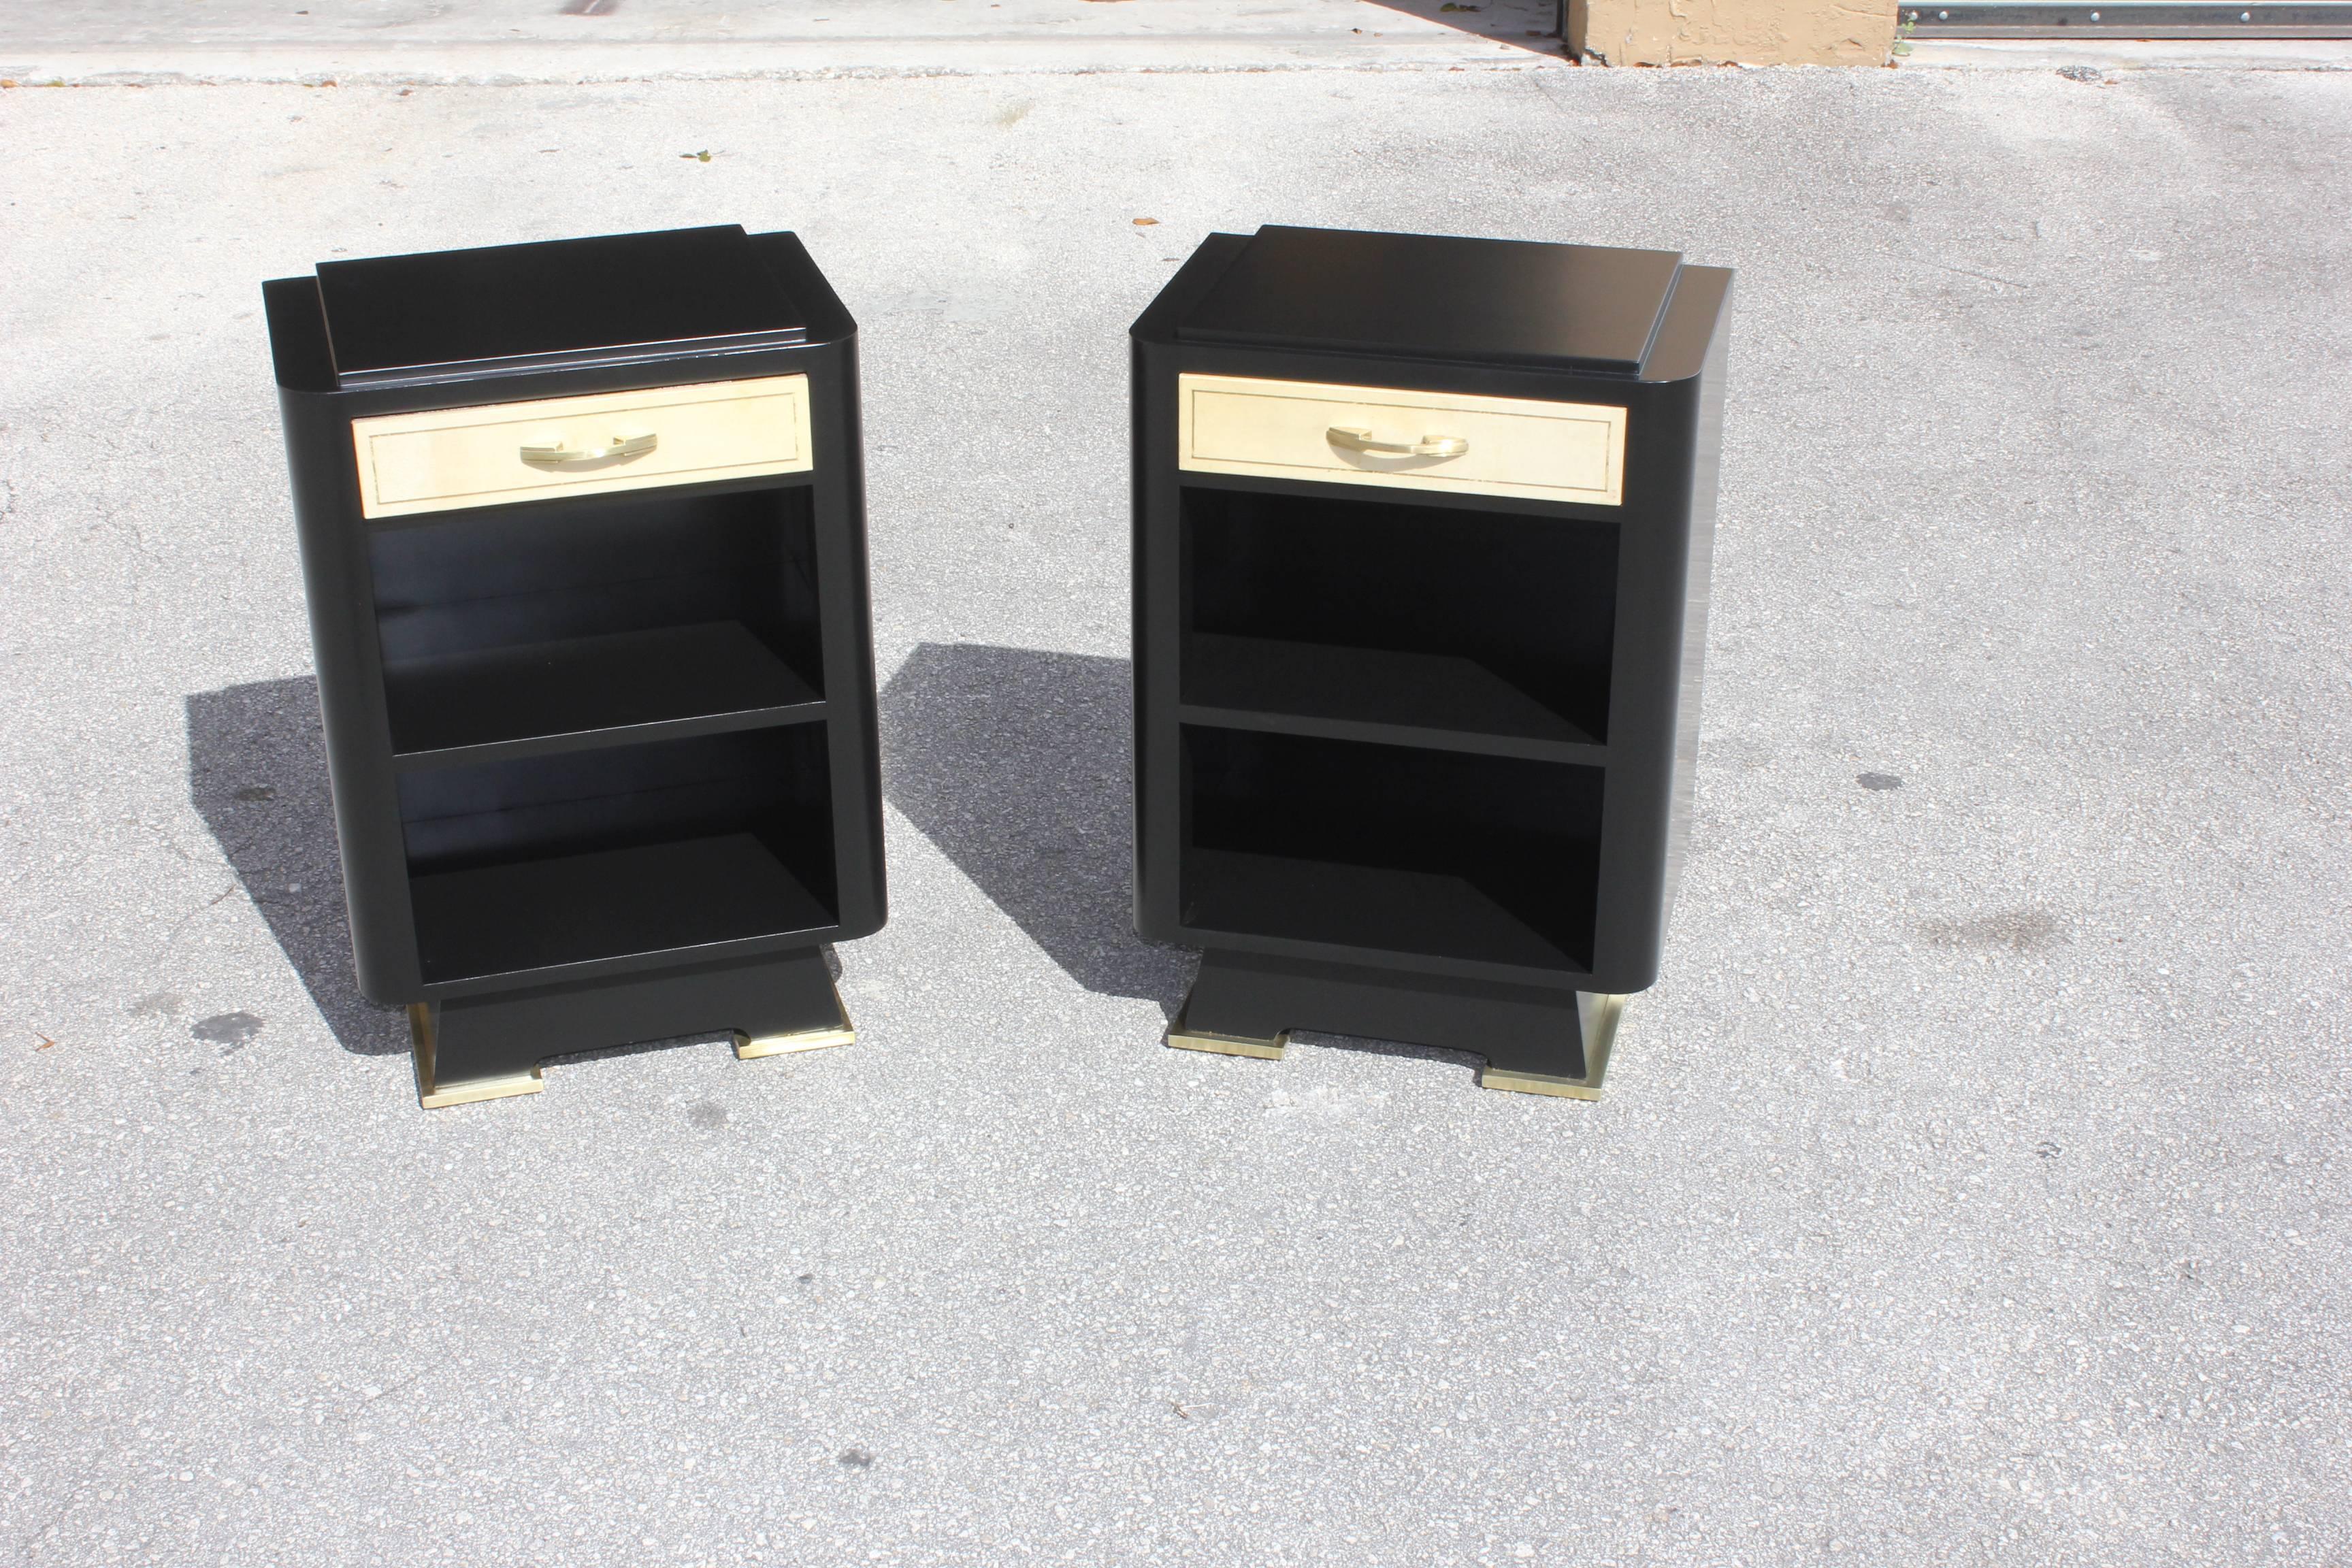 Classic Pair Of French Art Deco Parchment / Ebonized Side Table, 1940's parchment Drawer with bronze detail hardware ,beautiful Legs hardware bronze detail ,refinish inside and outside in perfect condition ,WE TRAVELED TO BUY ALL OUR PIECES IN